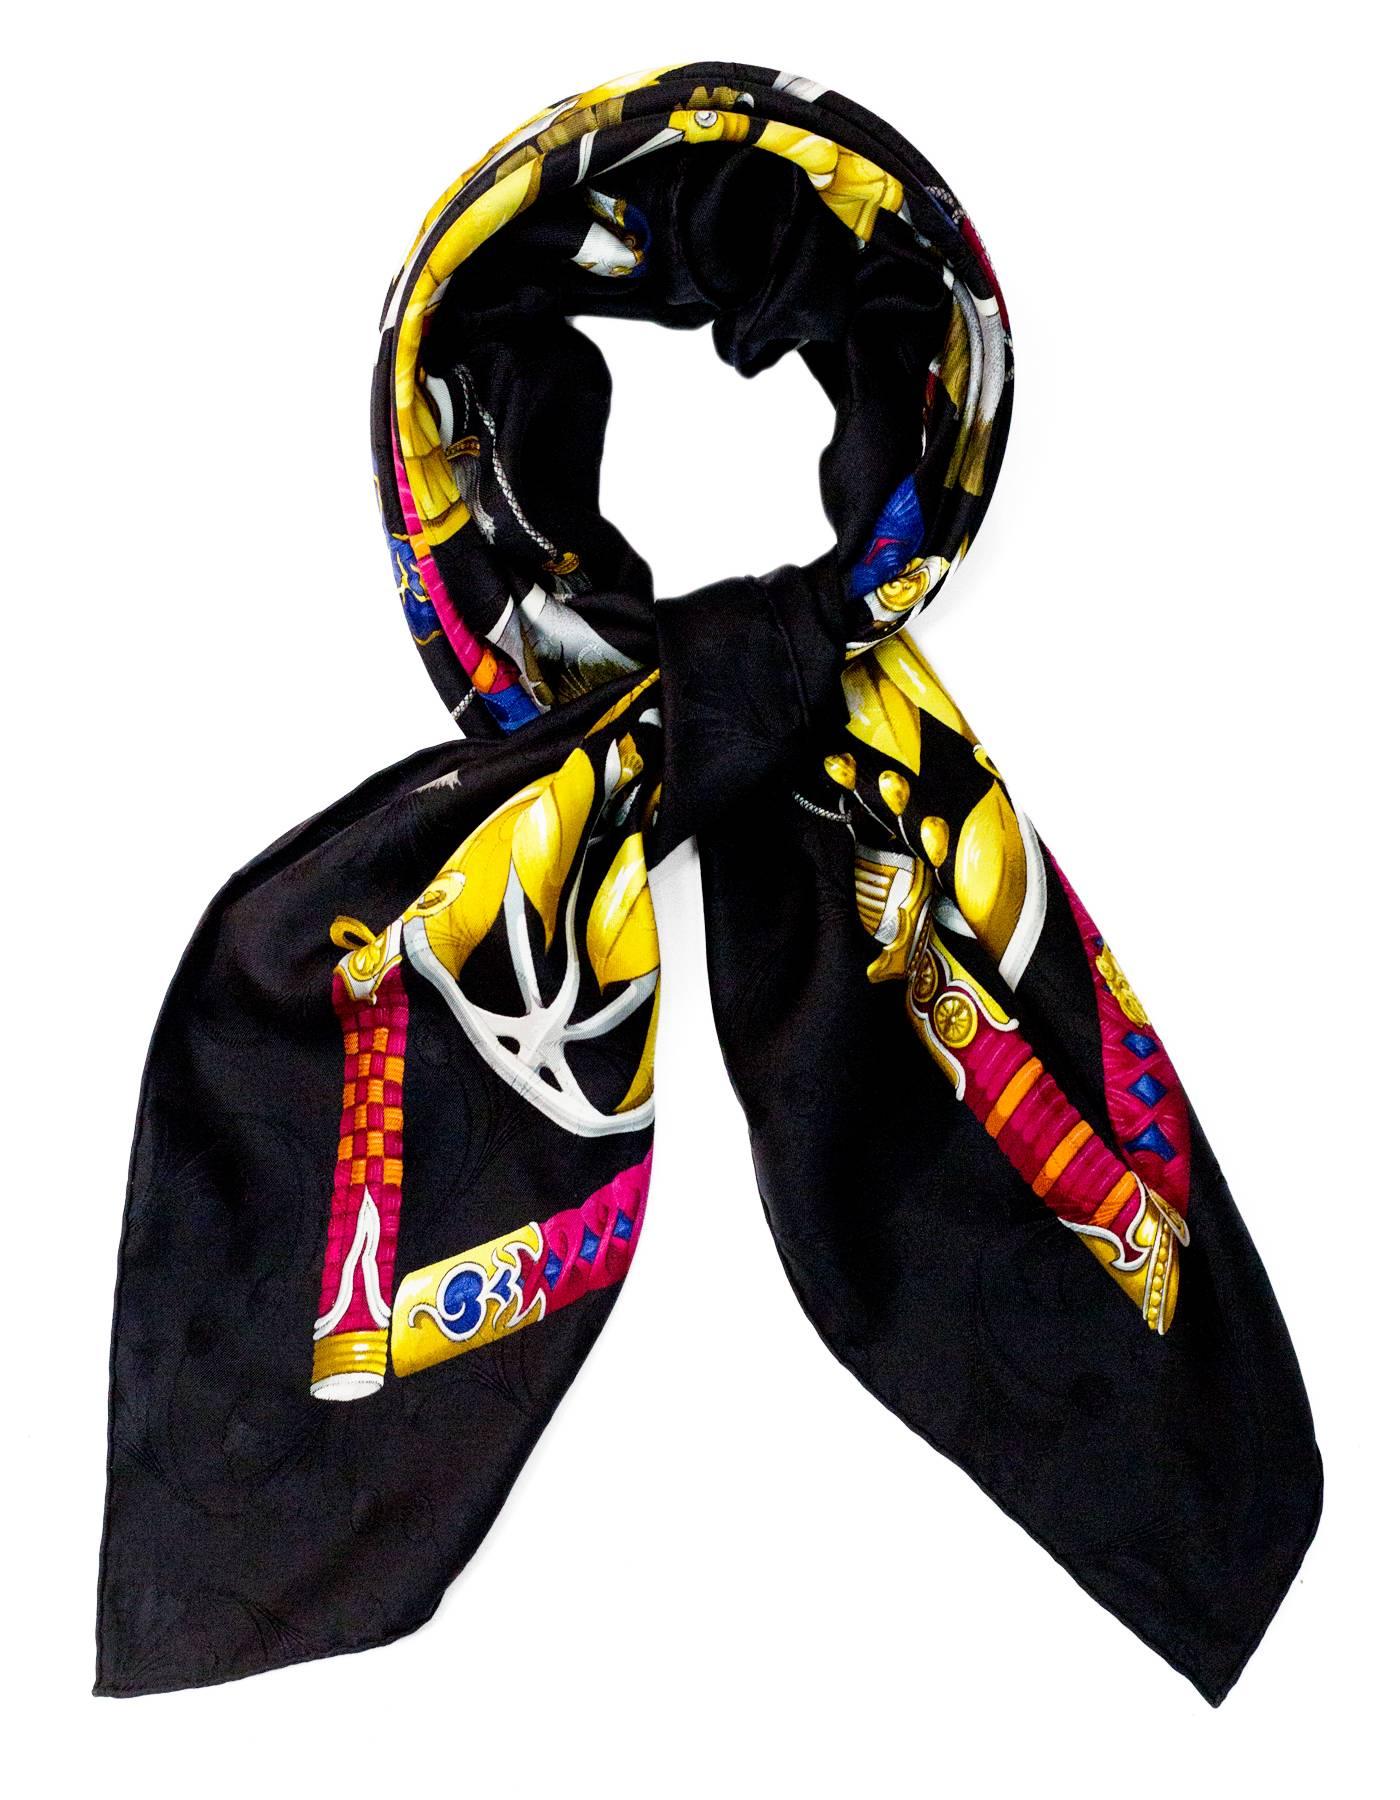 Hermes Black & Gold Princes du Soleil Levant Silk 90cm Scarf

Made In: France
Color: Black, gold
Composition: 100% Silk
Retail Price: $395 + tax
Overall Condition: Excellent pre-owned vintage condition

Measurements:
Length: 35"
Width: